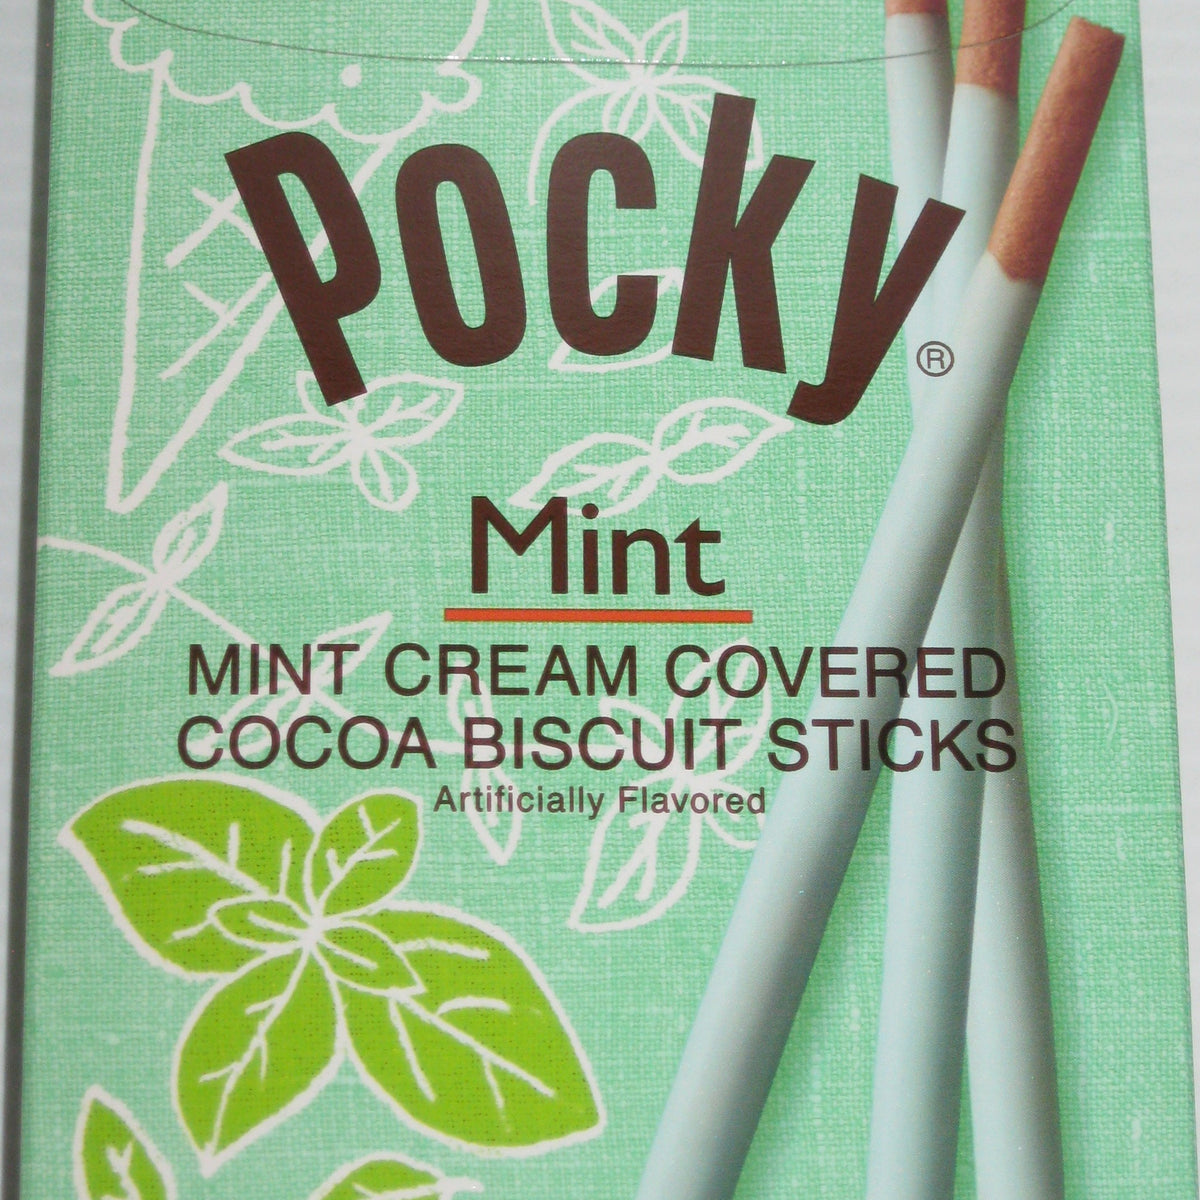 Giant Pocky: Oversized chocolate-covered biscuit sticks.